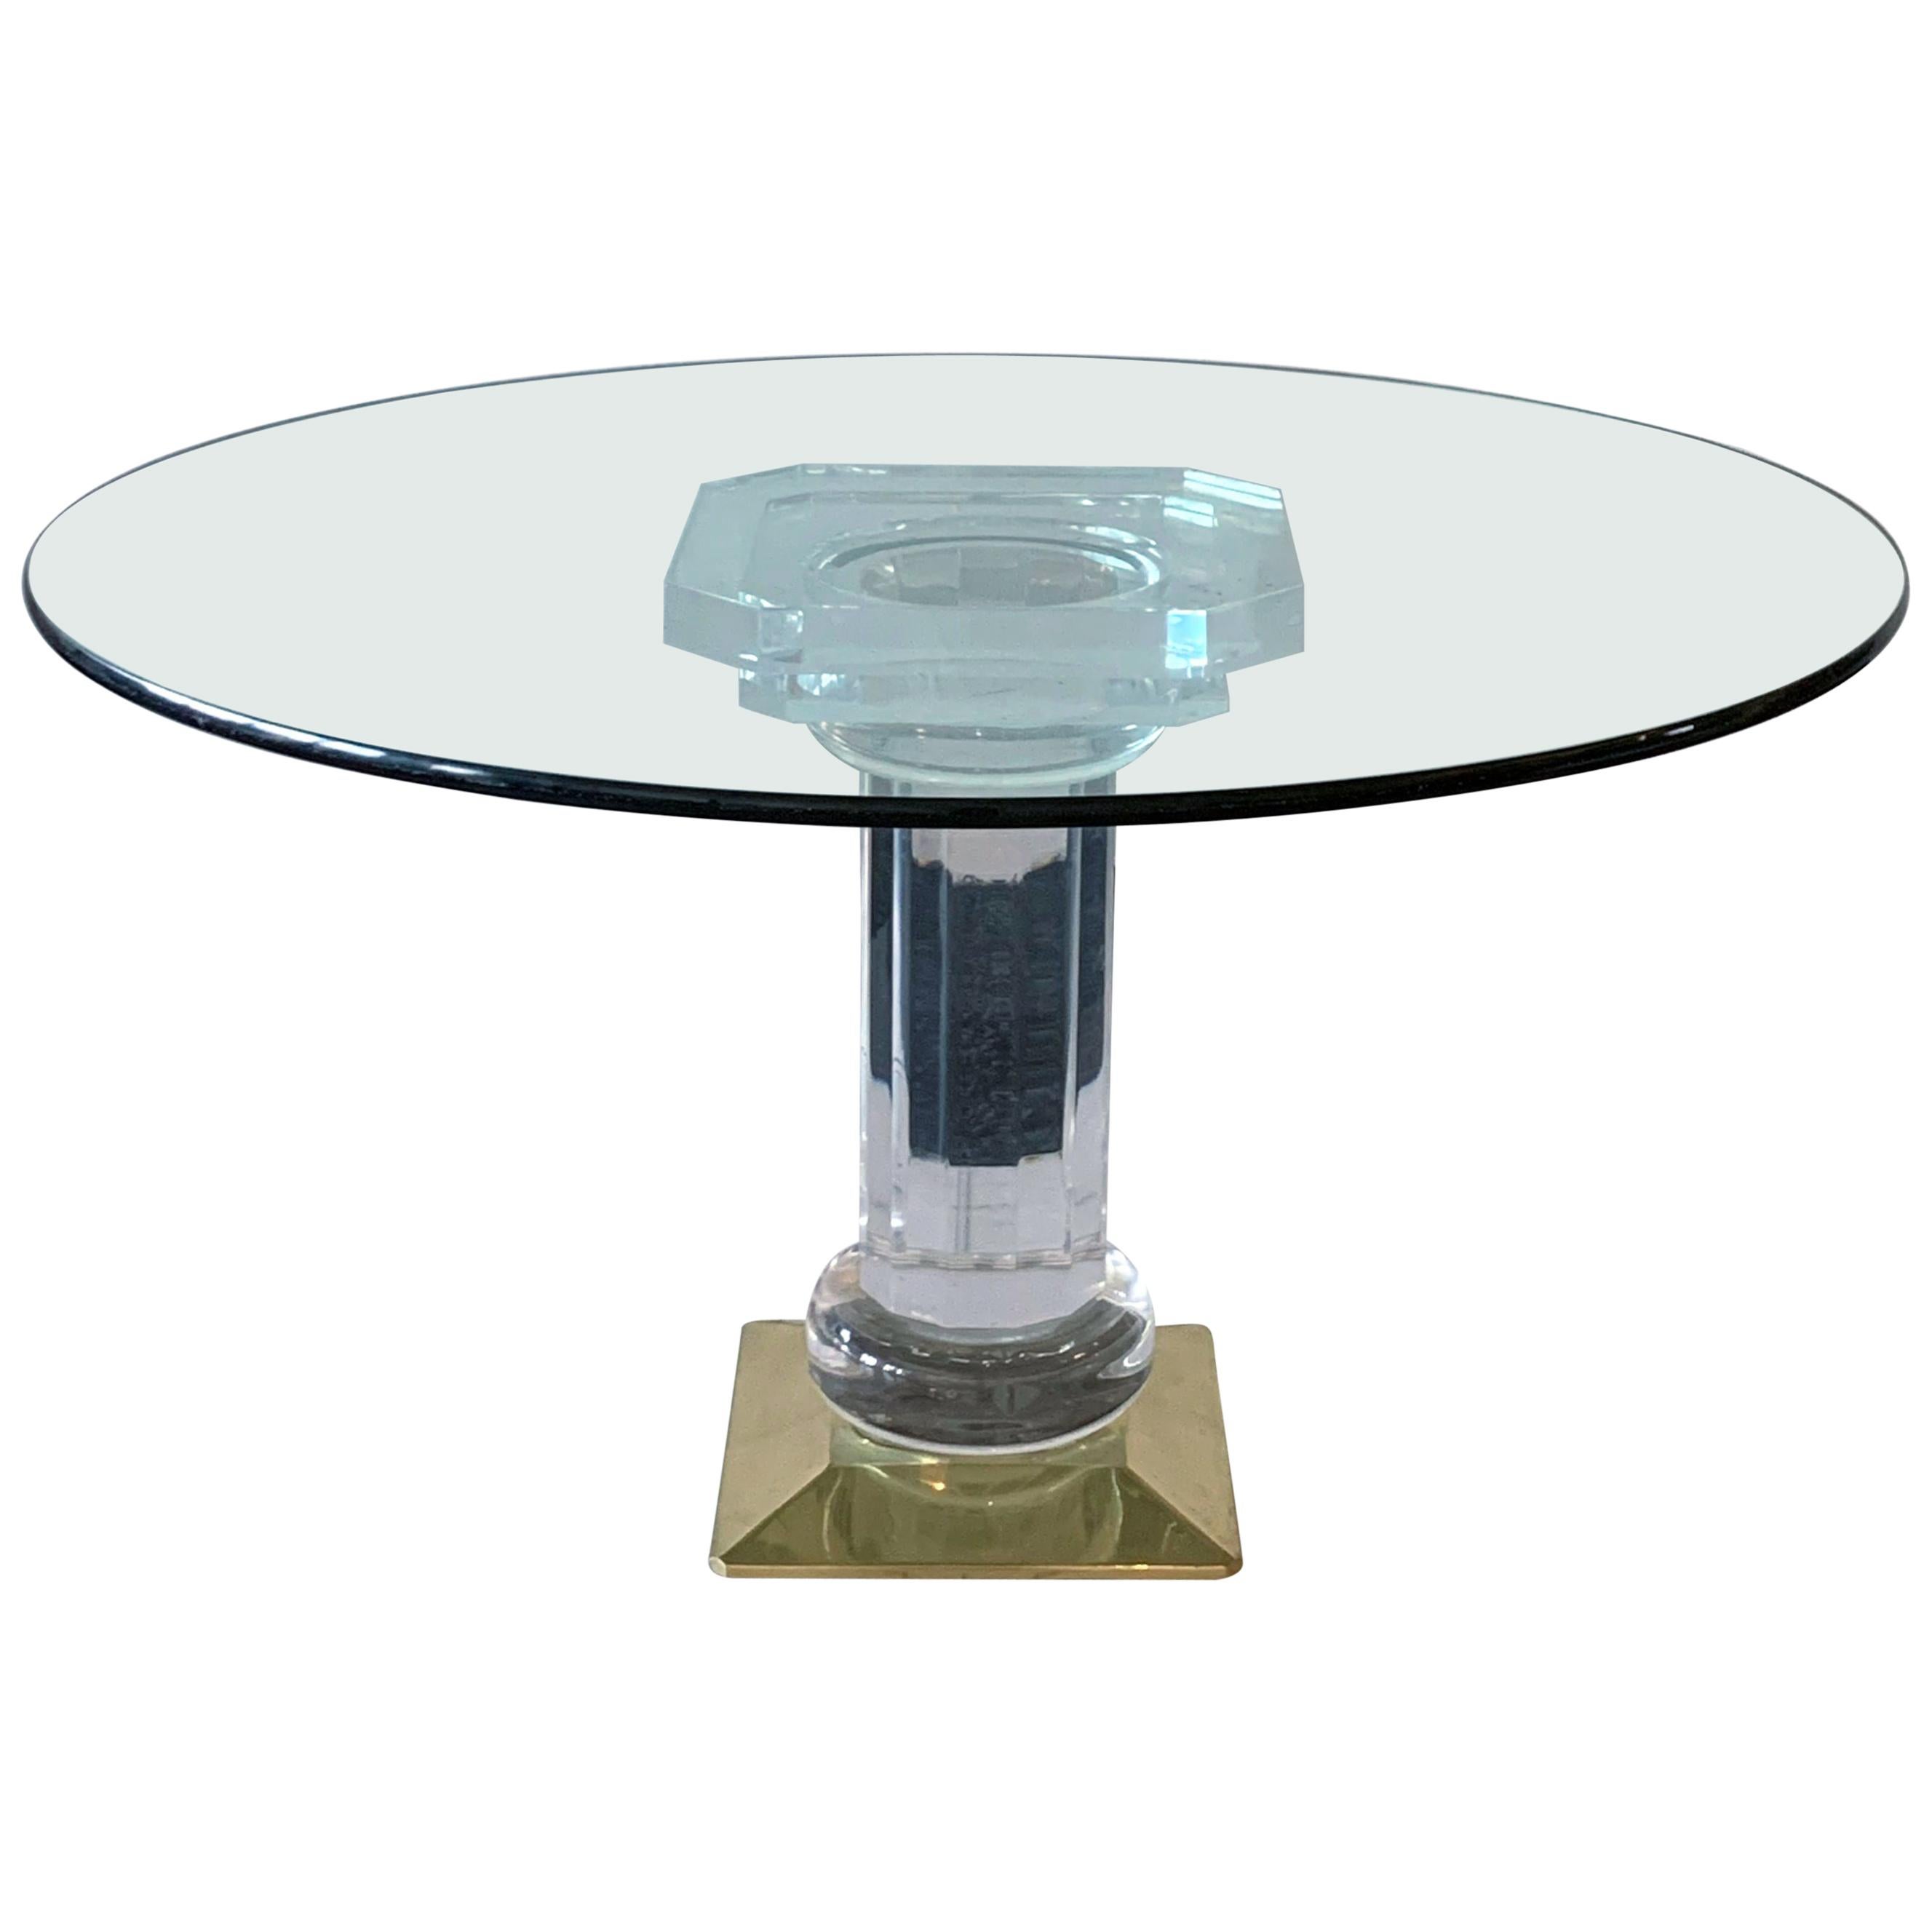 Italian Brass, Acrylic and Glass Dining Table Pedestal 1970s